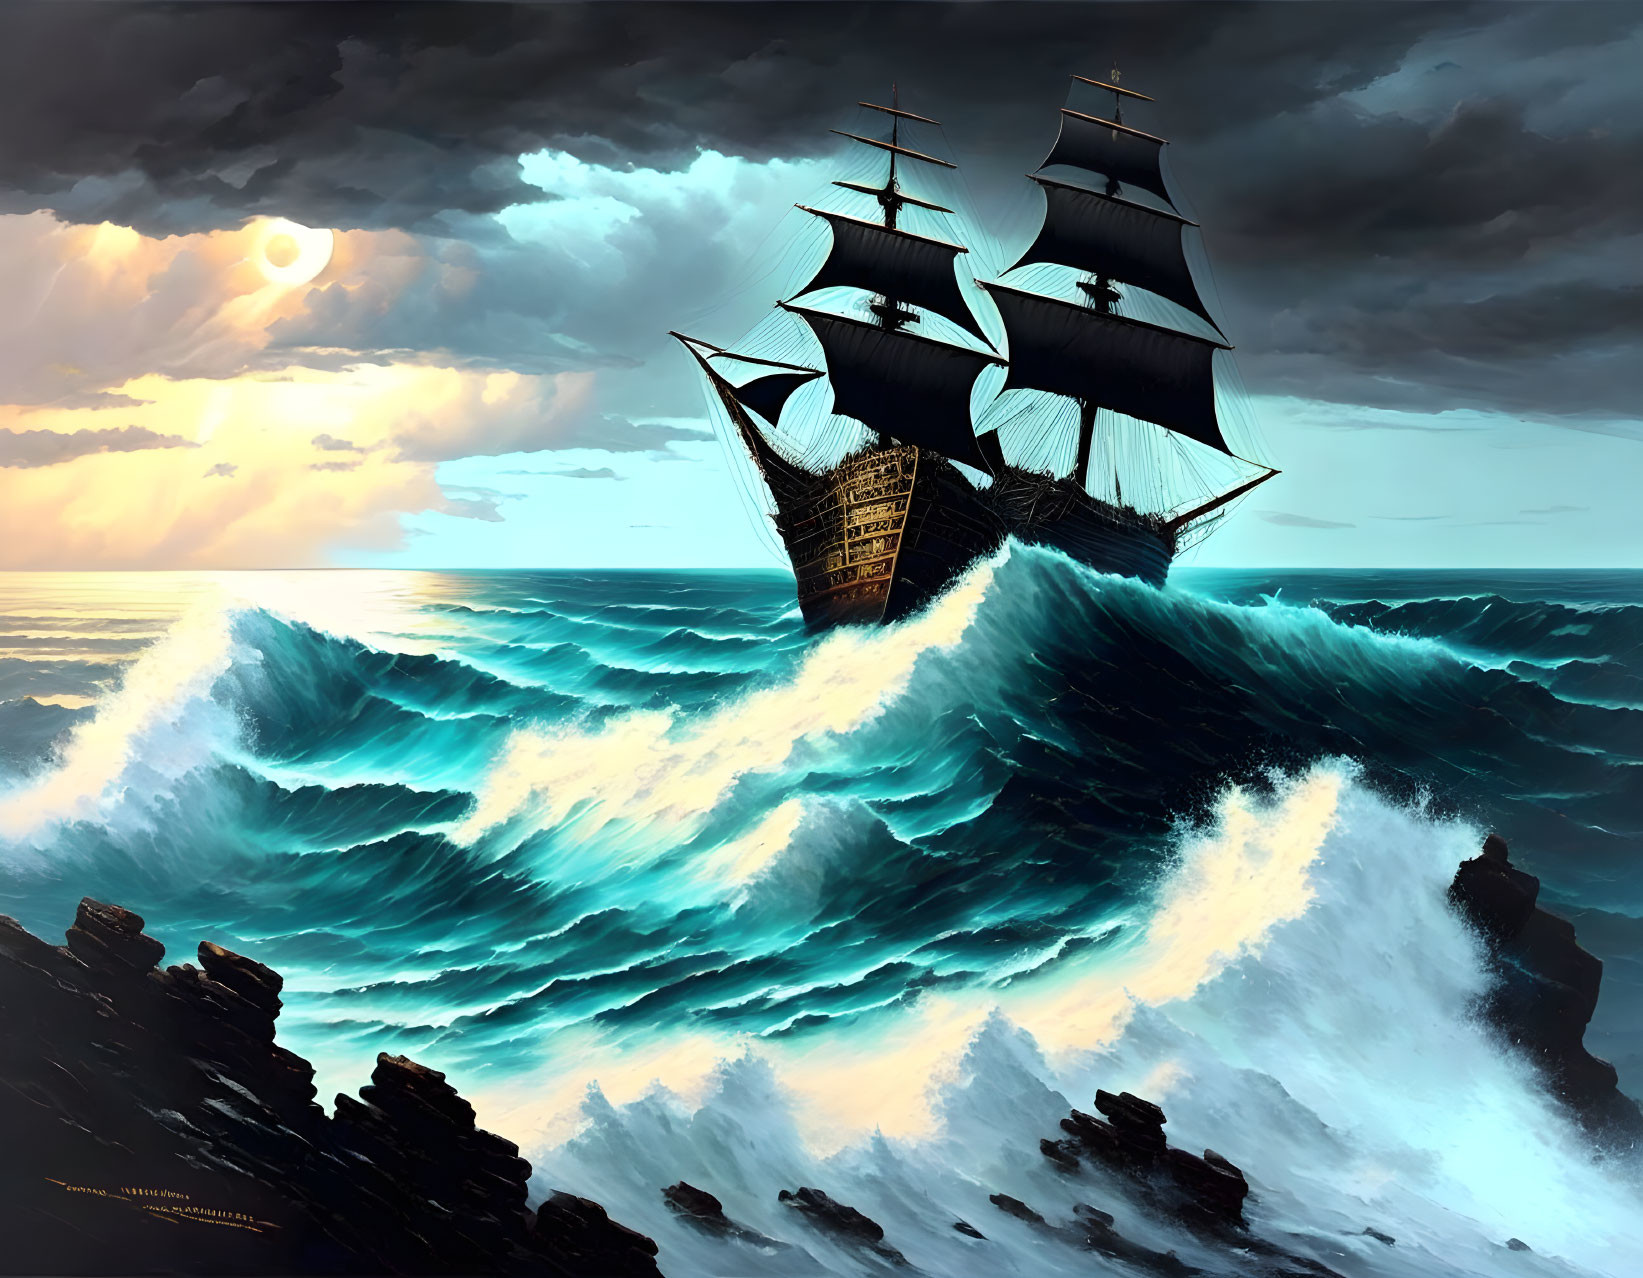 Tall ship sailing through stormy seas with unfurled sails